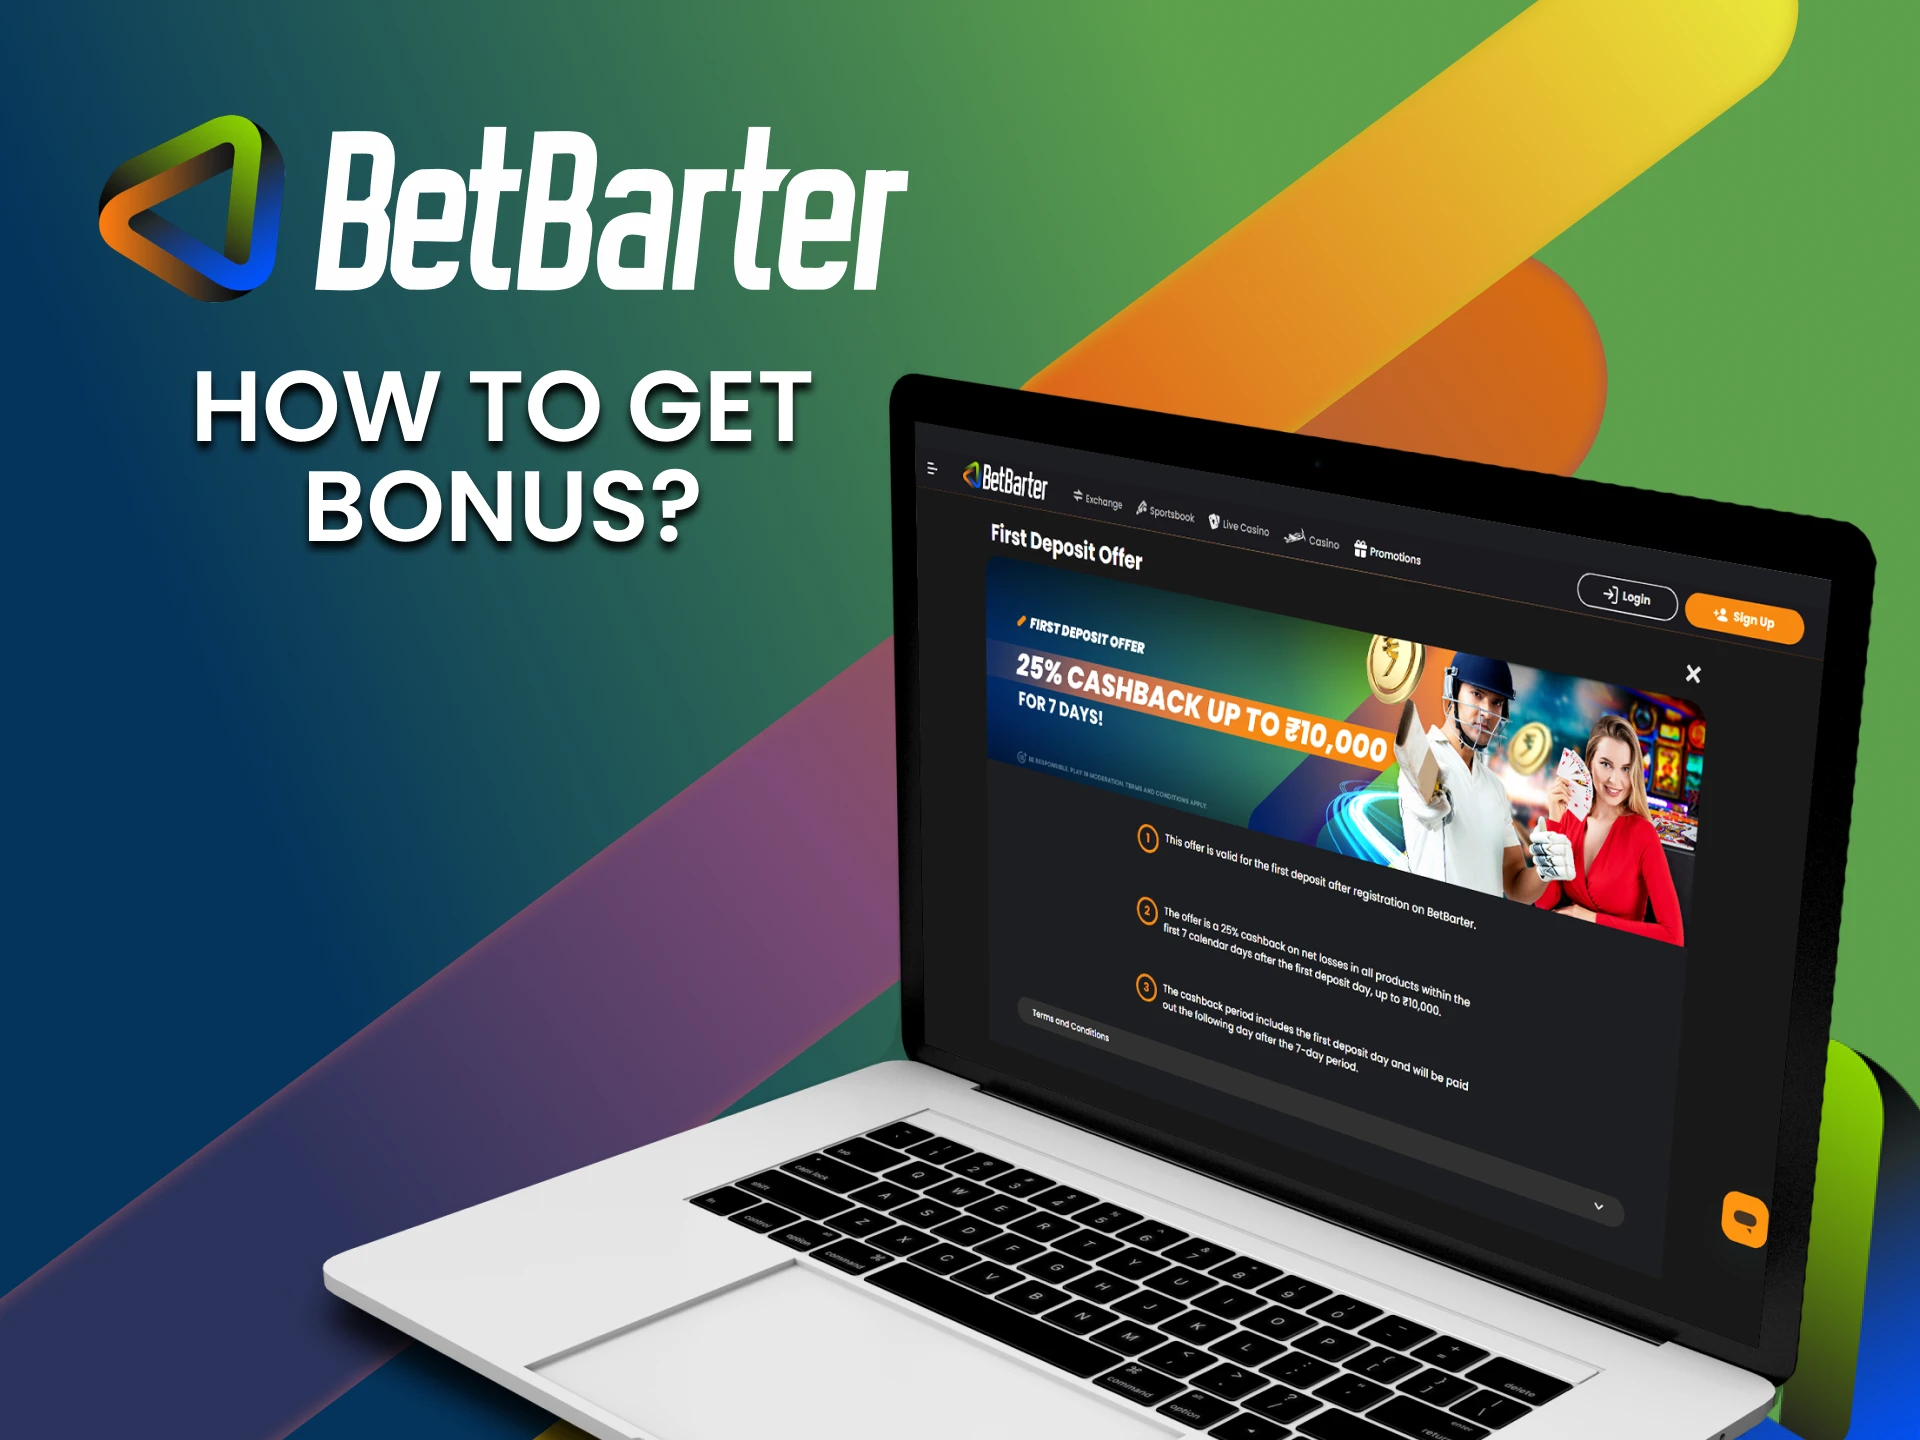 We will tell you how to get a bonus on BetBarter.